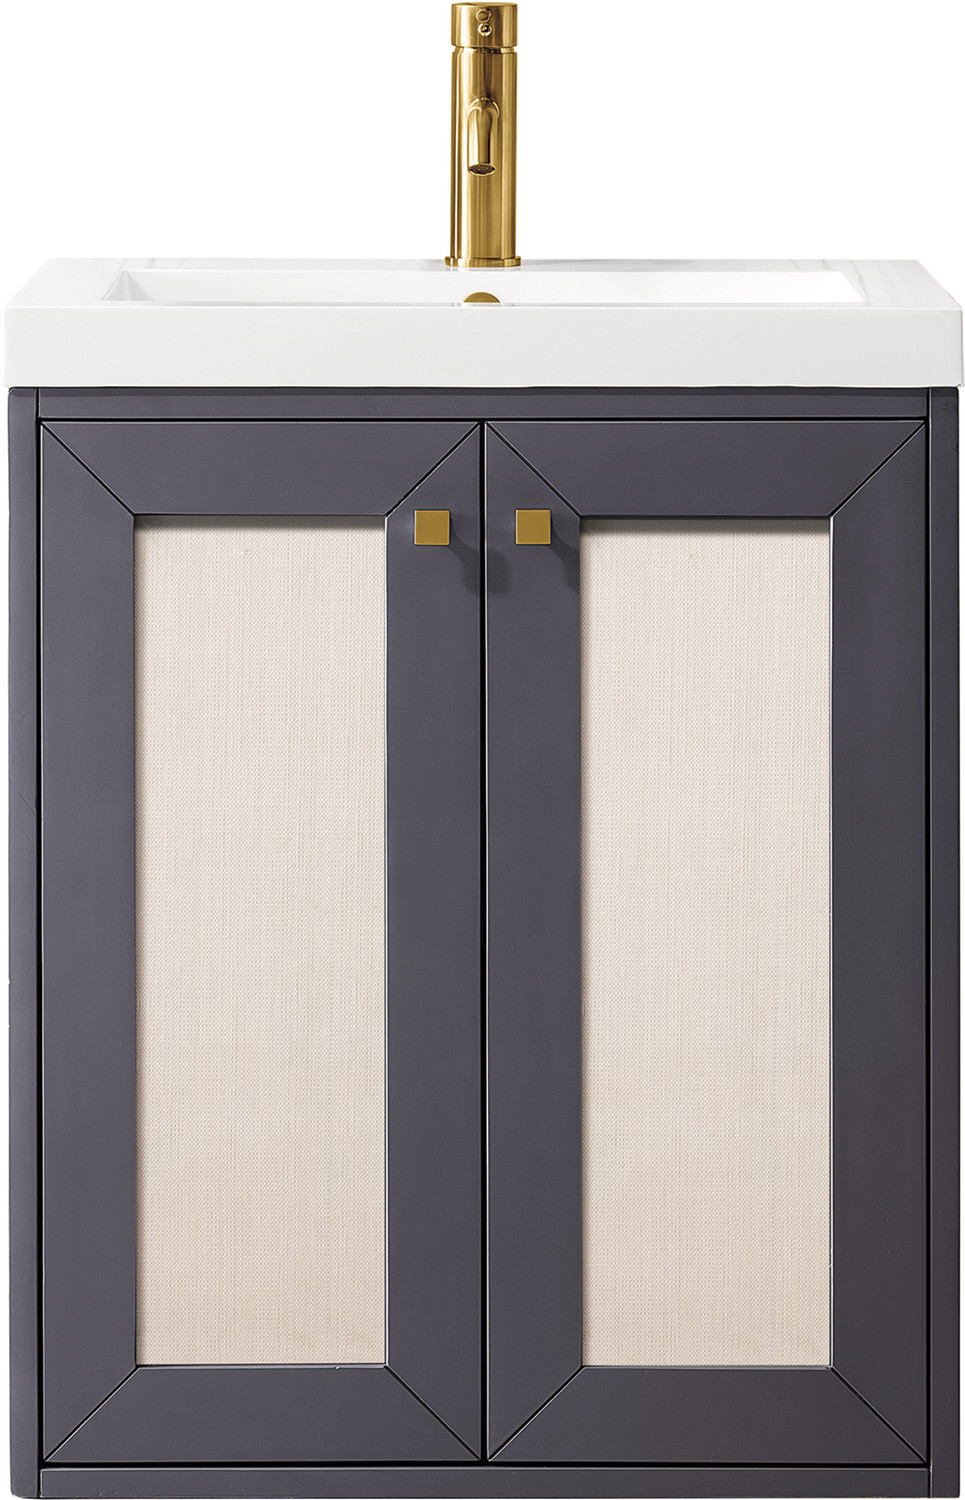 bathroom vanity with sink 30 inch James Martin Vanity Mineral Gray Transitional